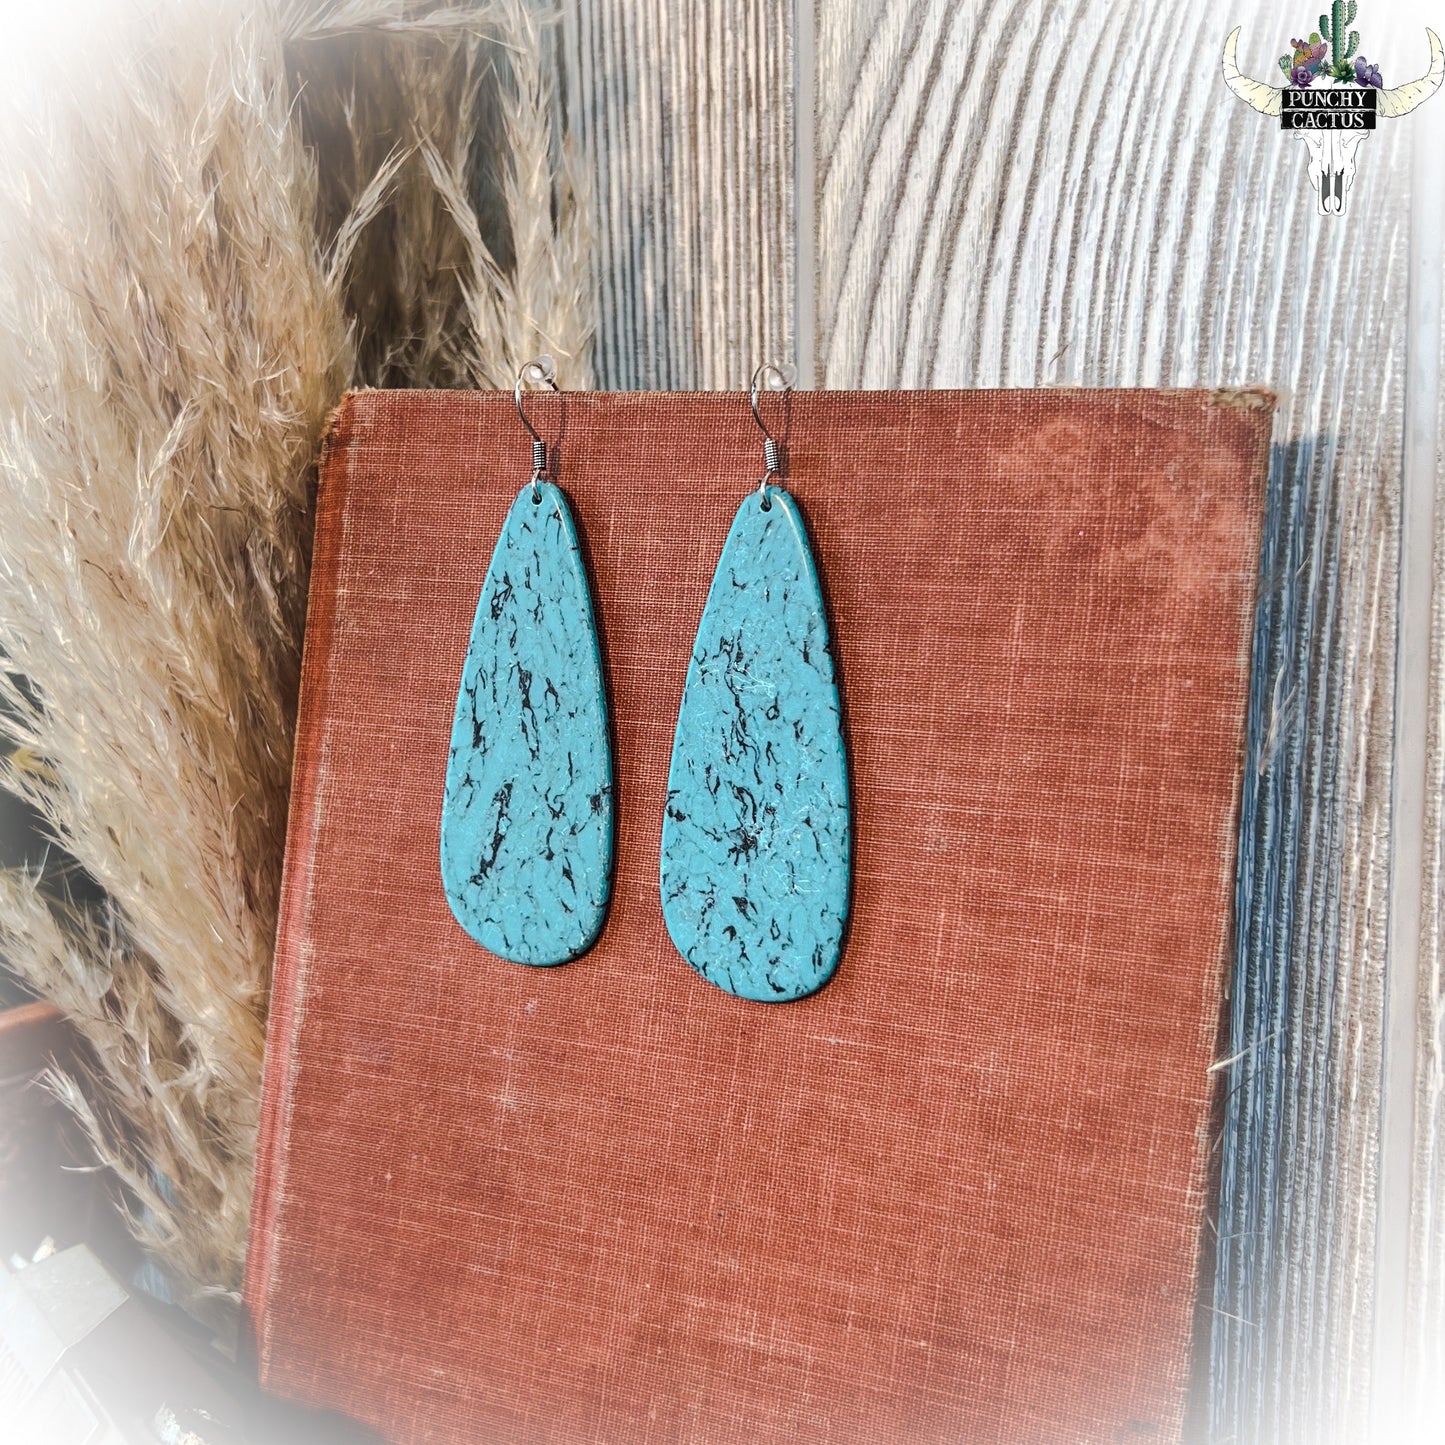 Lonely Earrings - Turquoise